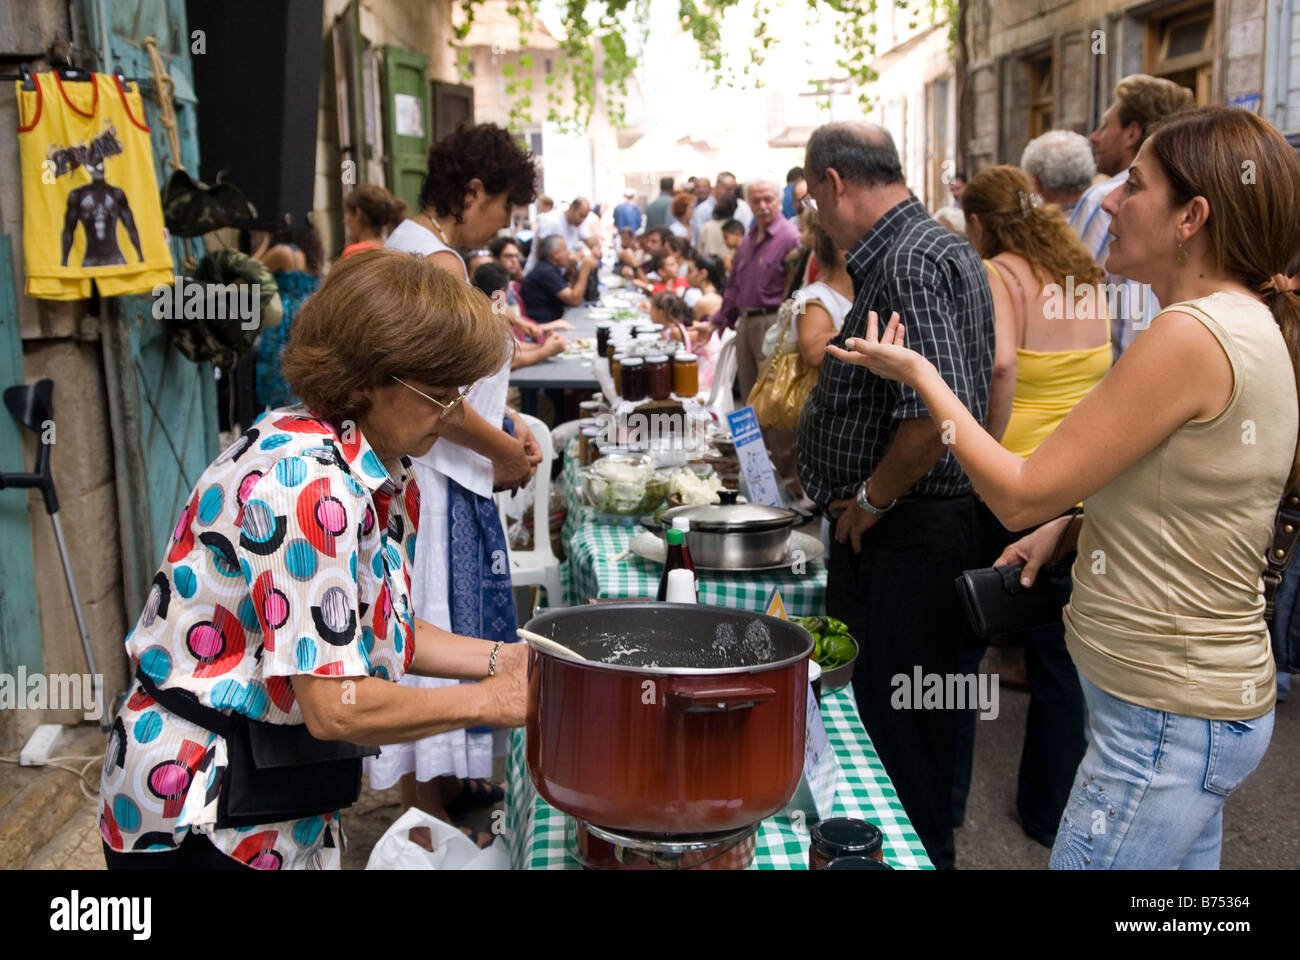 Food festival in northern Lebanon Middle East Stock Photo